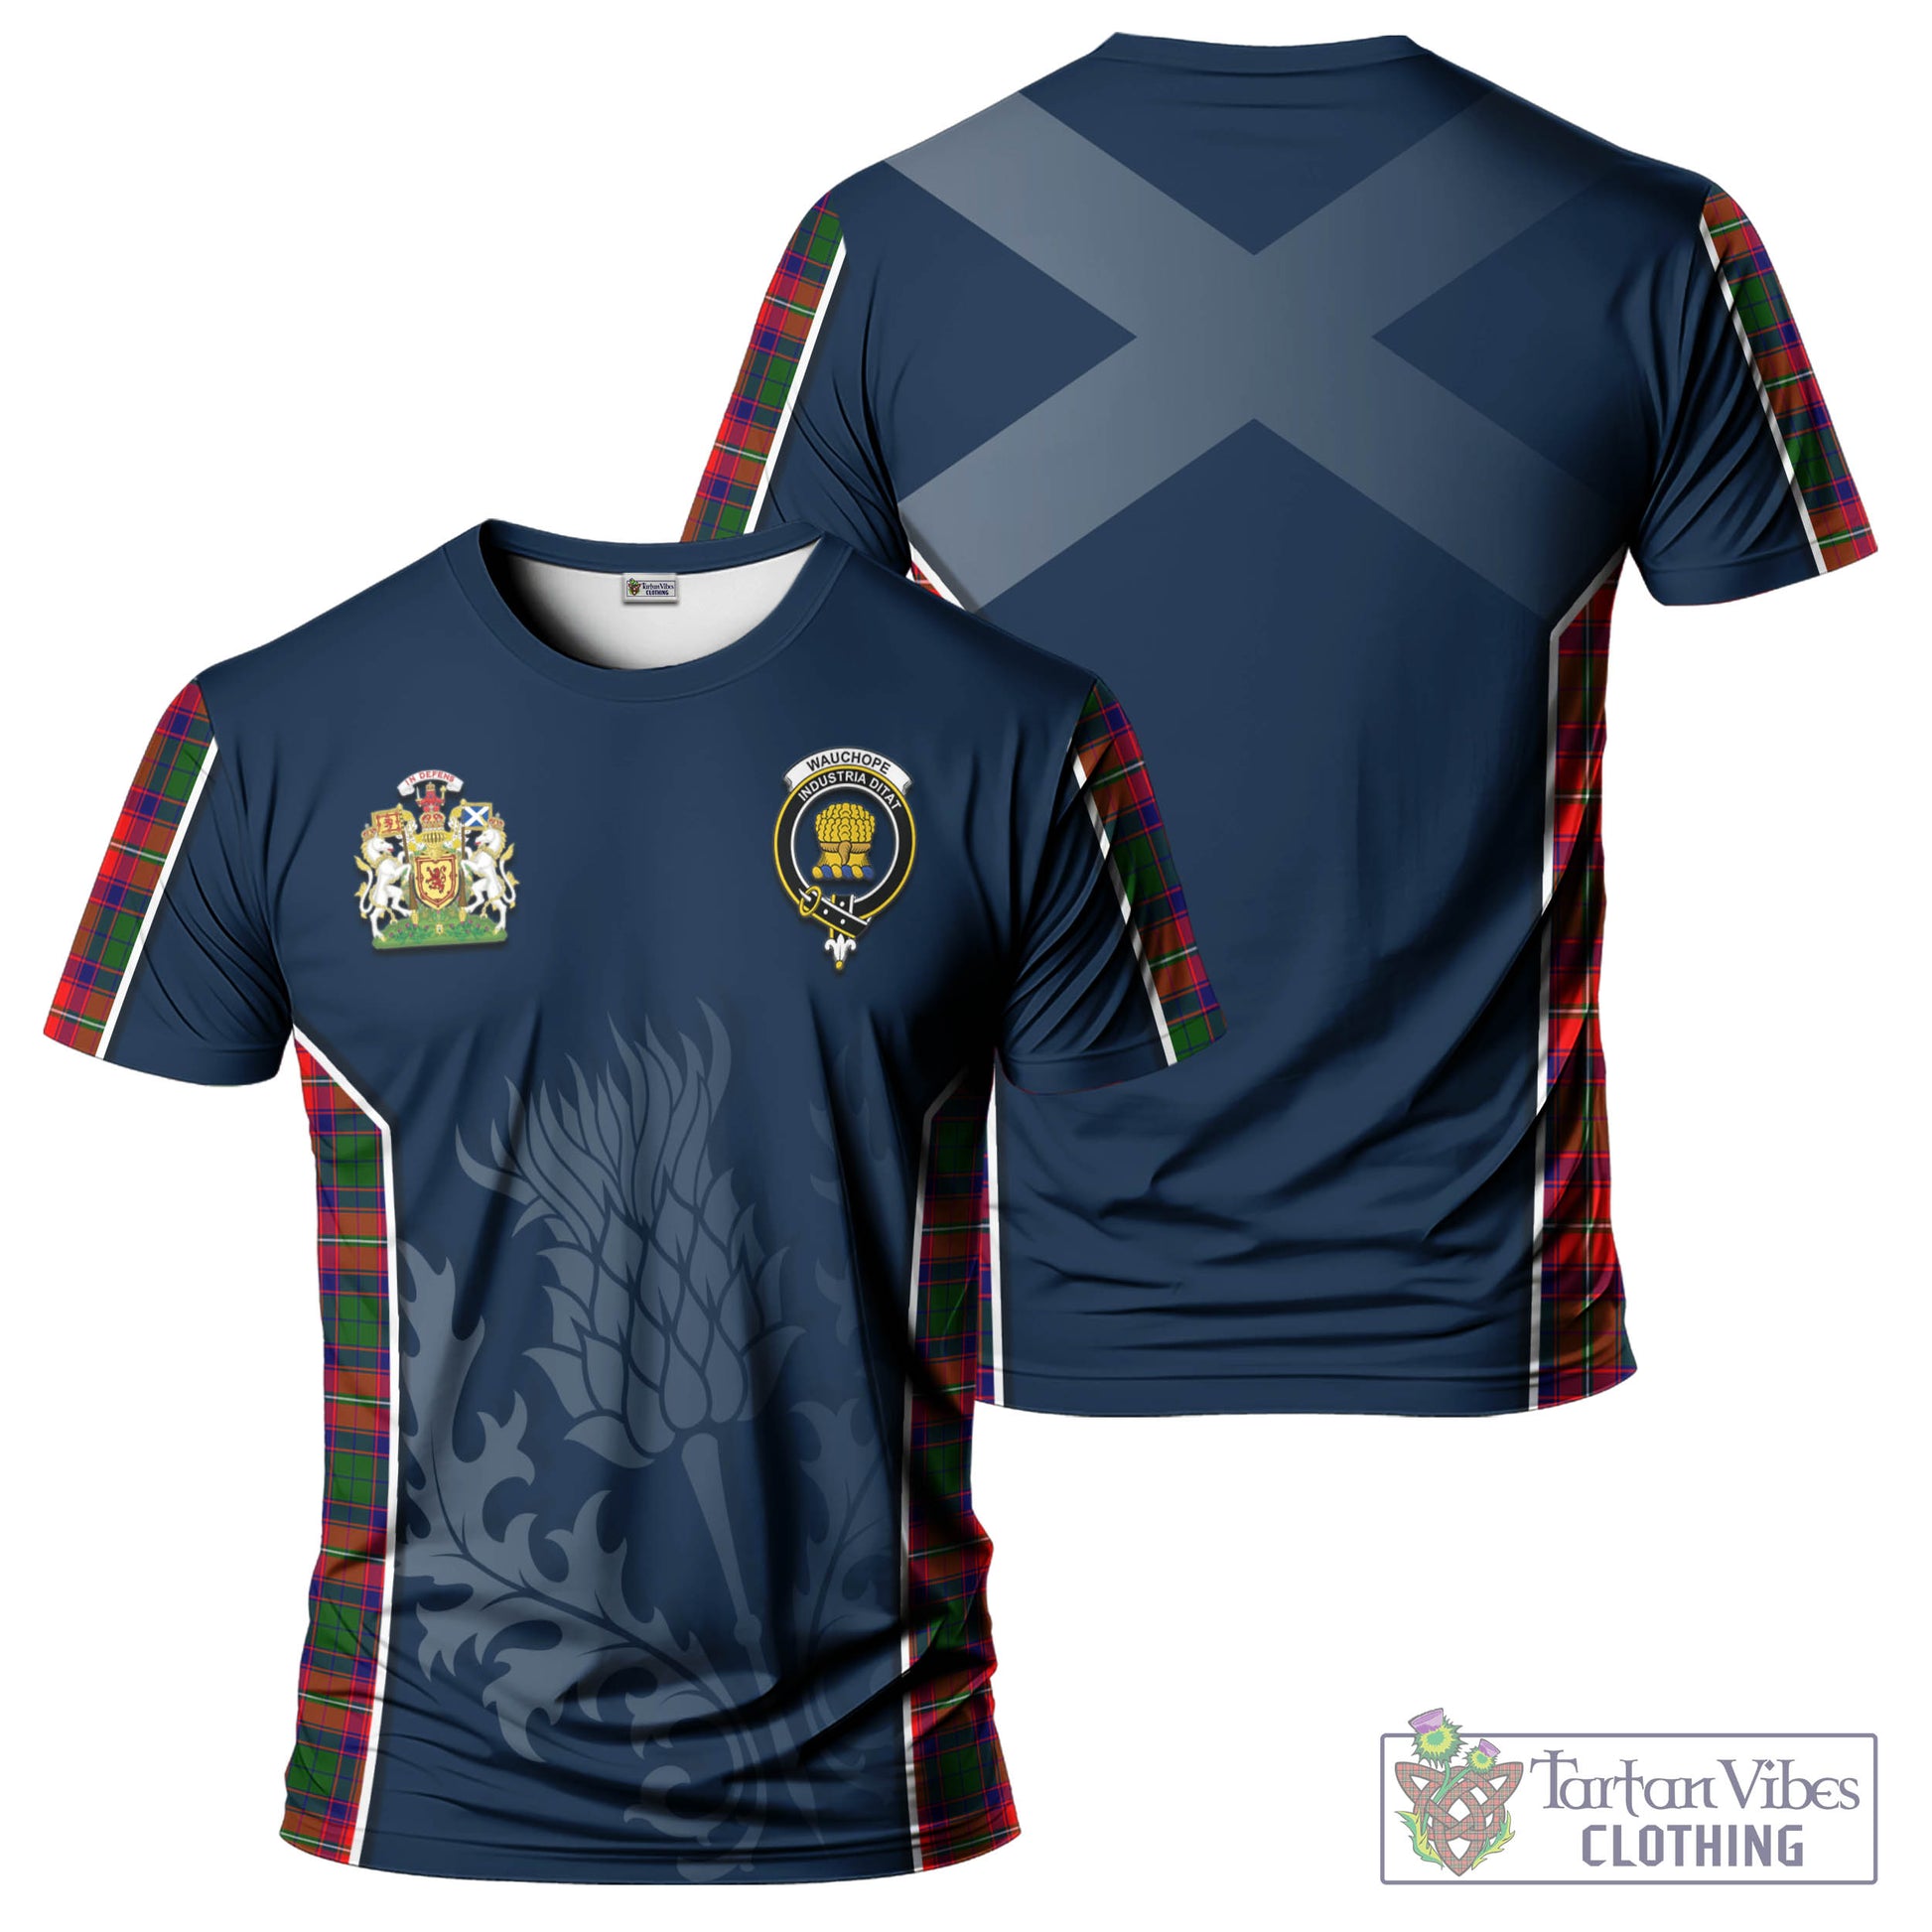 Tartan Vibes Clothing Wauchope Tartan T-Shirt with Family Crest and Scottish Thistle Vibes Sport Style